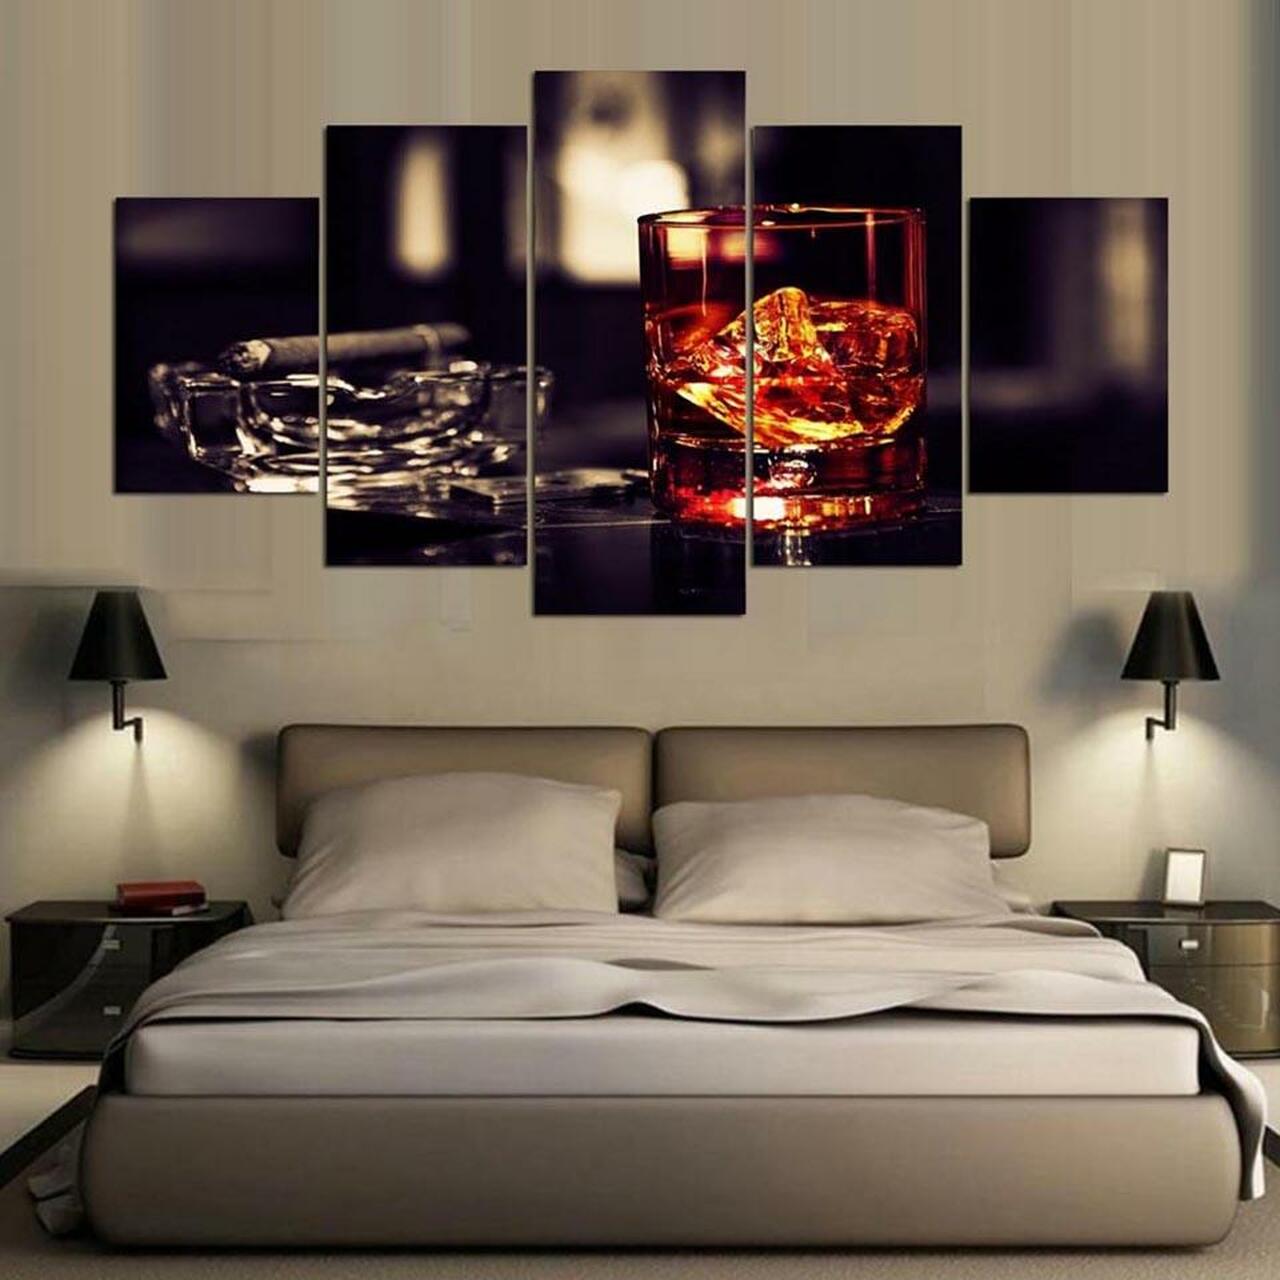 Cigar and Whiskey 5 Piece Canvas Art Wall Decor